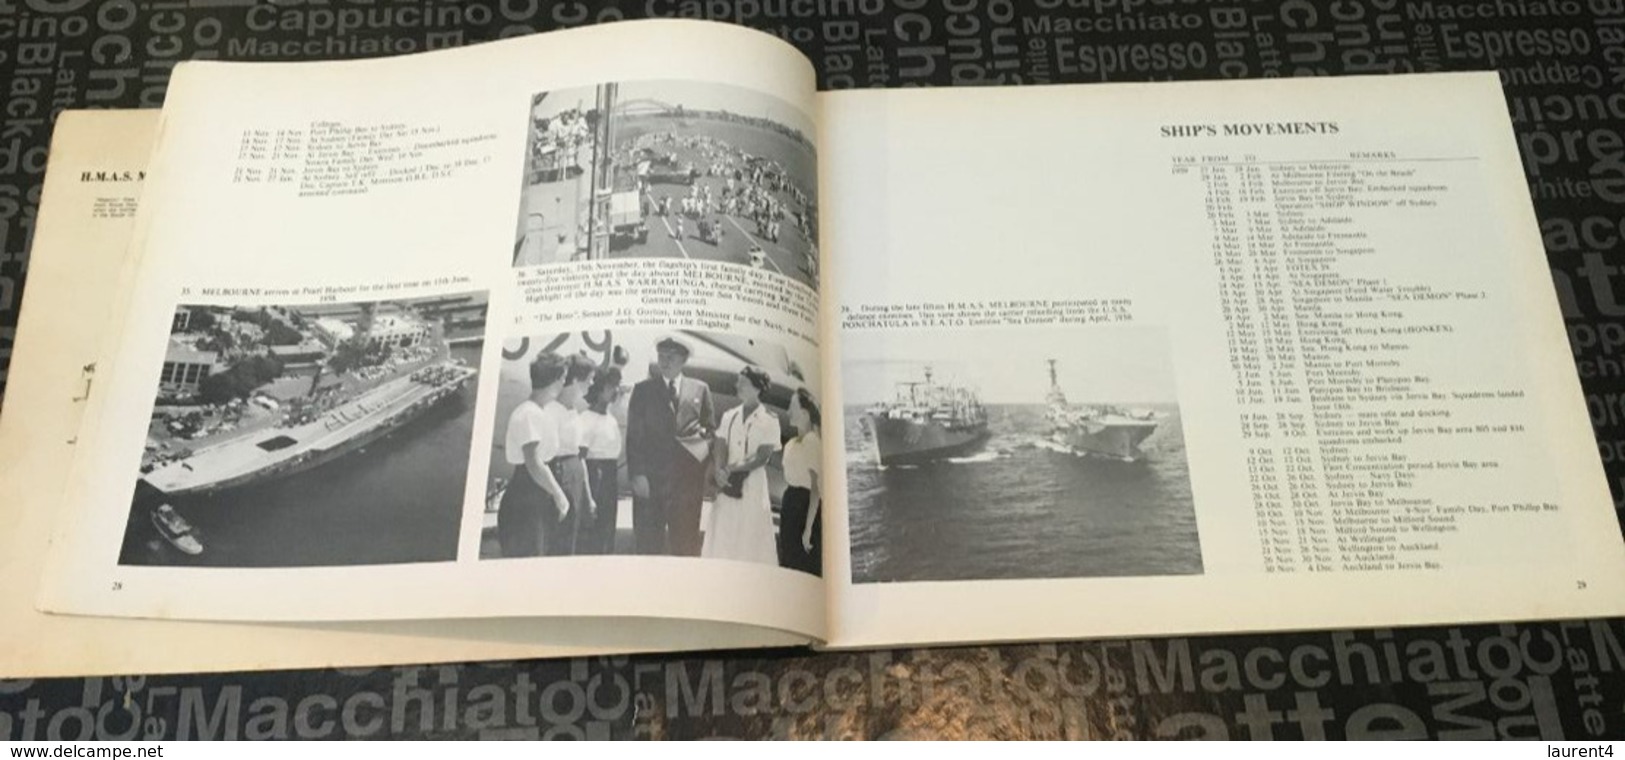 (Book) Australia - HMAS Melbourne - 25 Years -  128 Pages (weight / Poid 420g) - Buitenlandse Legers